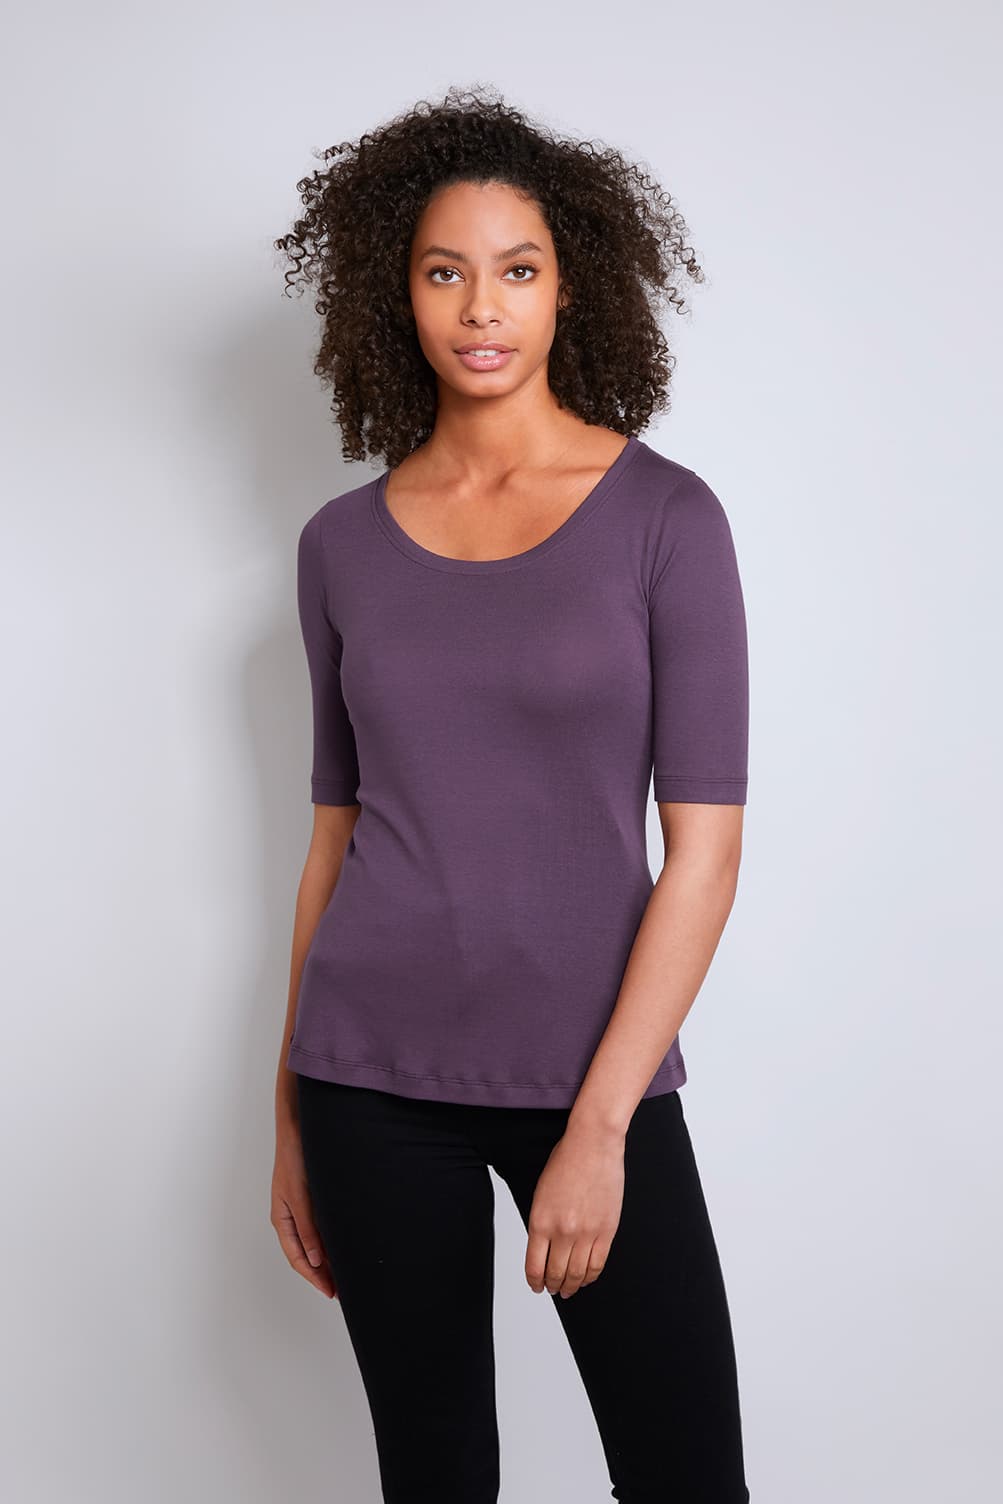 Women's Mid-Weight Flattering Purple Half Sleeve Scoop Neck T-Shirt - Quality Half Sleeve Scoop - Classic T-shirt Silhouette by Lavender Hill Clothing